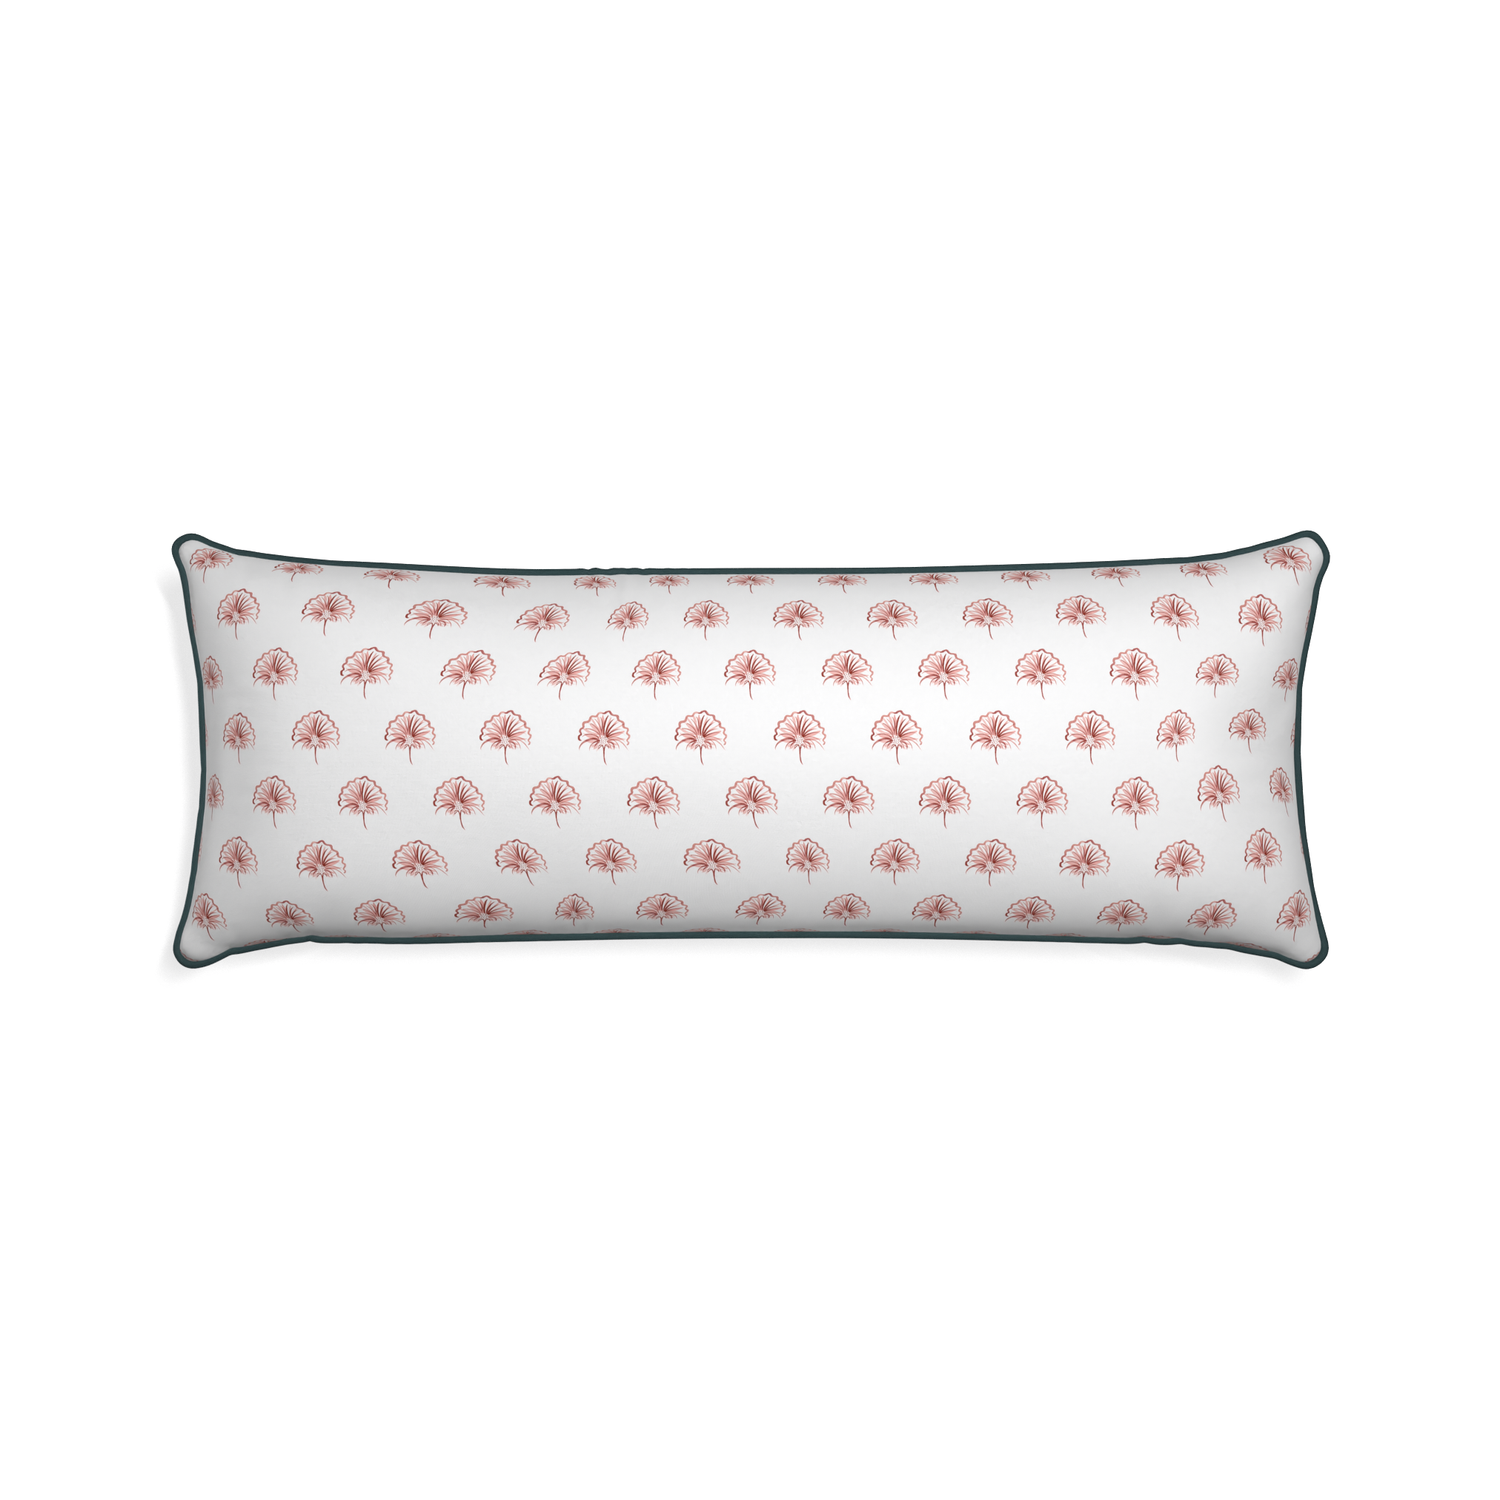 Xl-lumbar penelope rose custom floral pinkpillow with p piping on white background